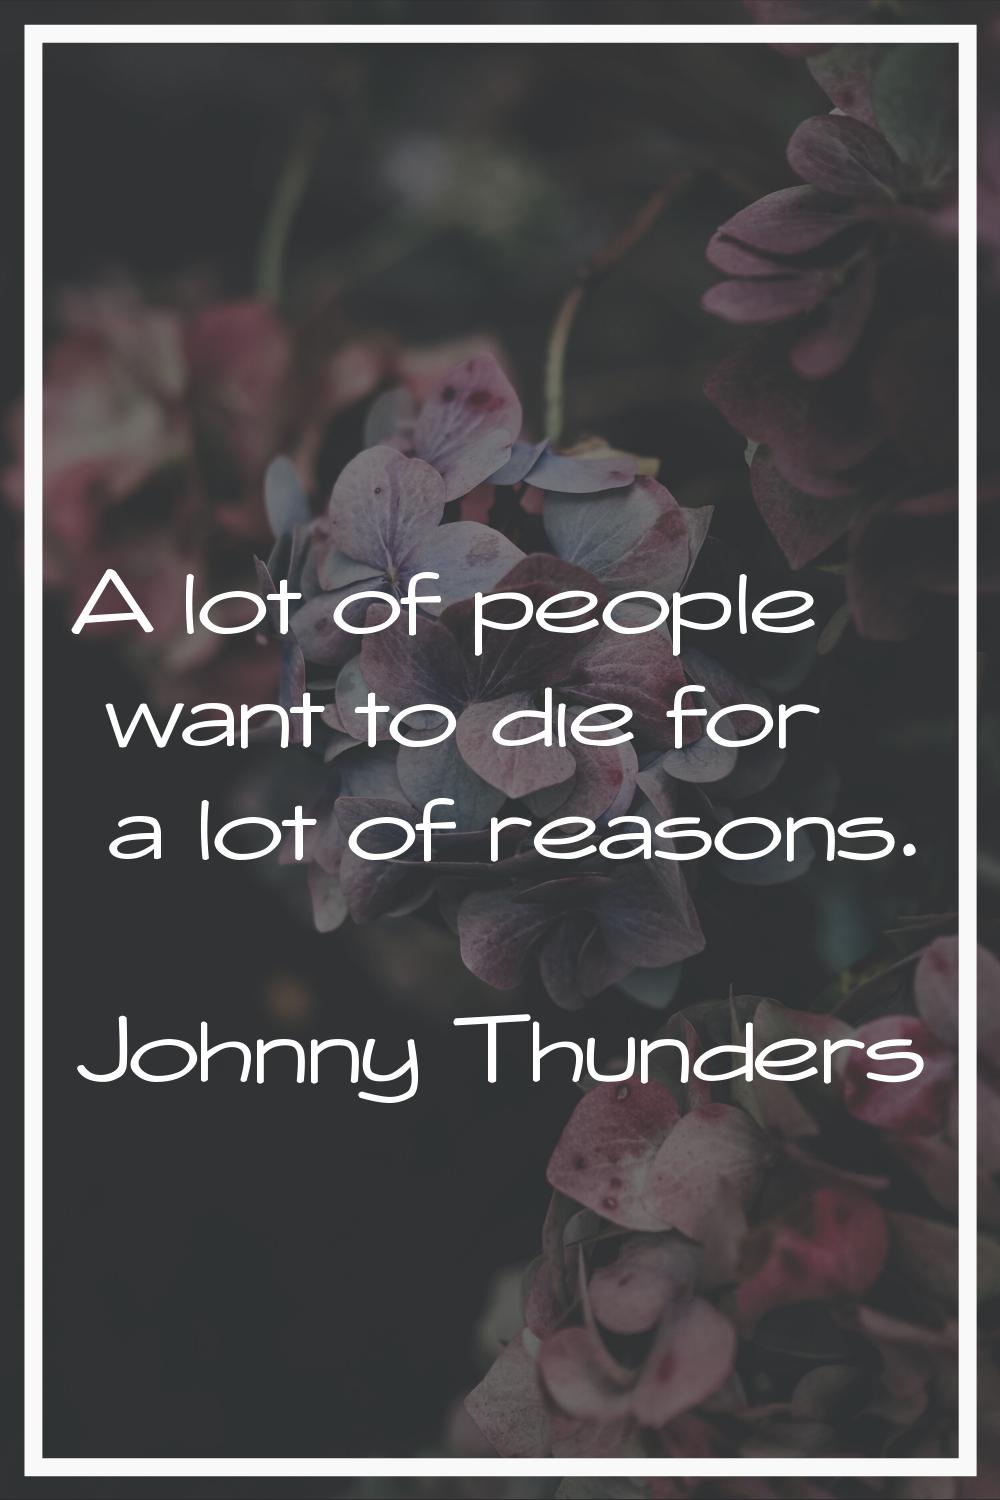 A lot of people want to die for a lot of reasons.